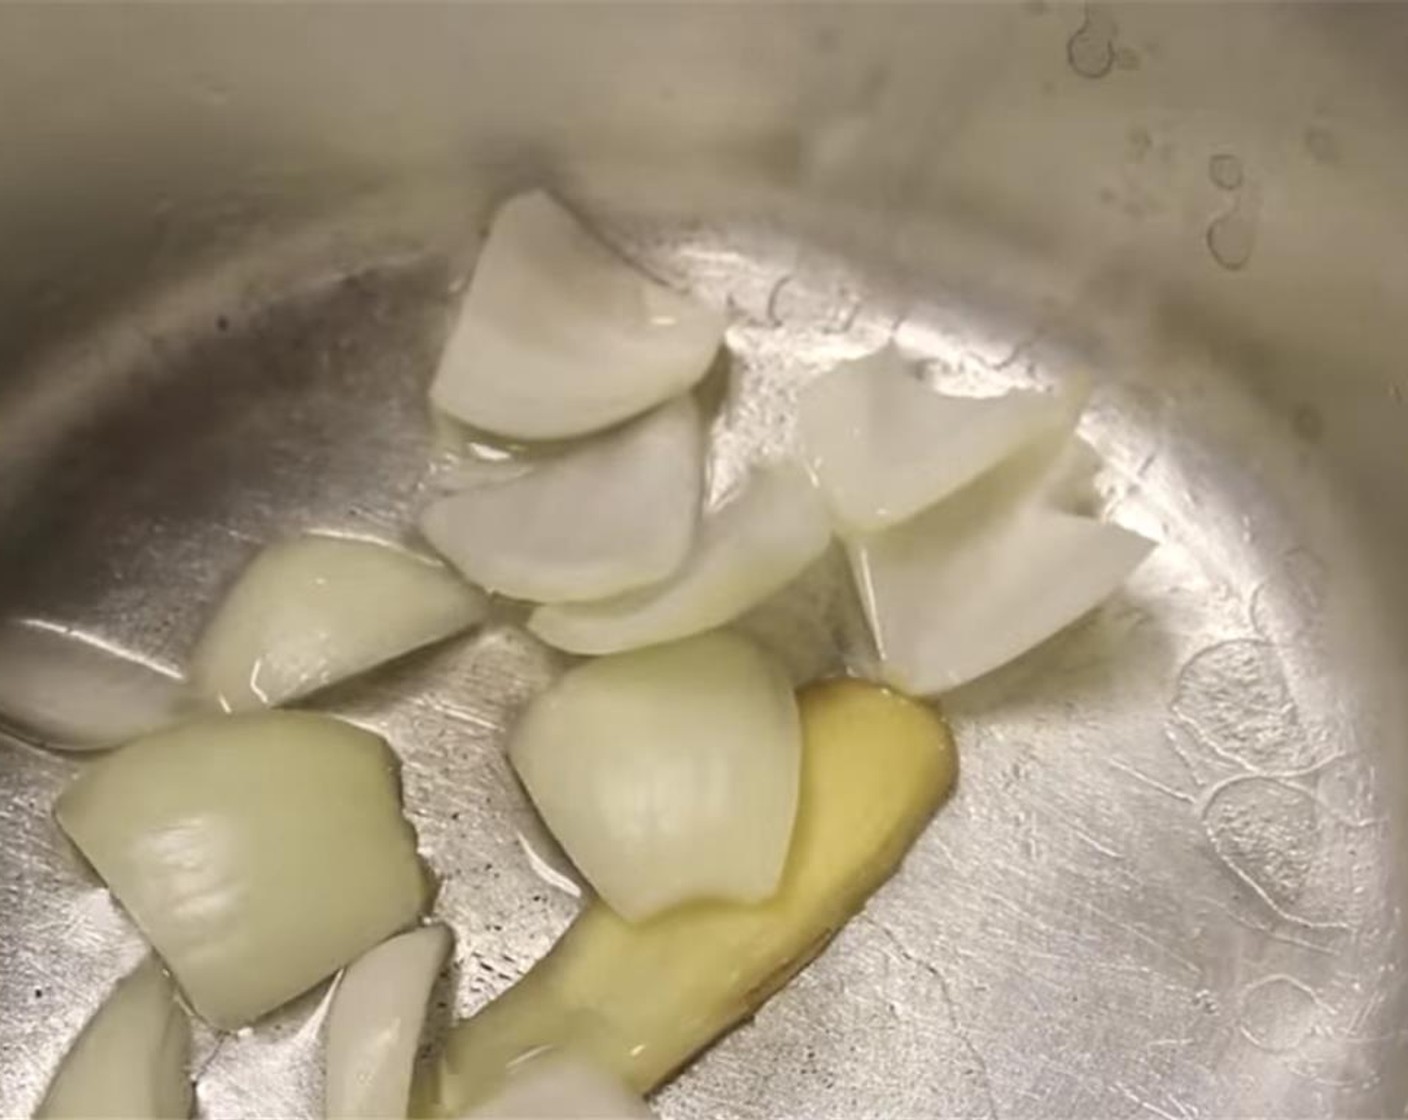 step 1 In a pot with Canola Oil (1/4 cup) at medium low heat, add chopped Onions (1 1/2 Tbsp) and Fresh Ginger (1 slice).